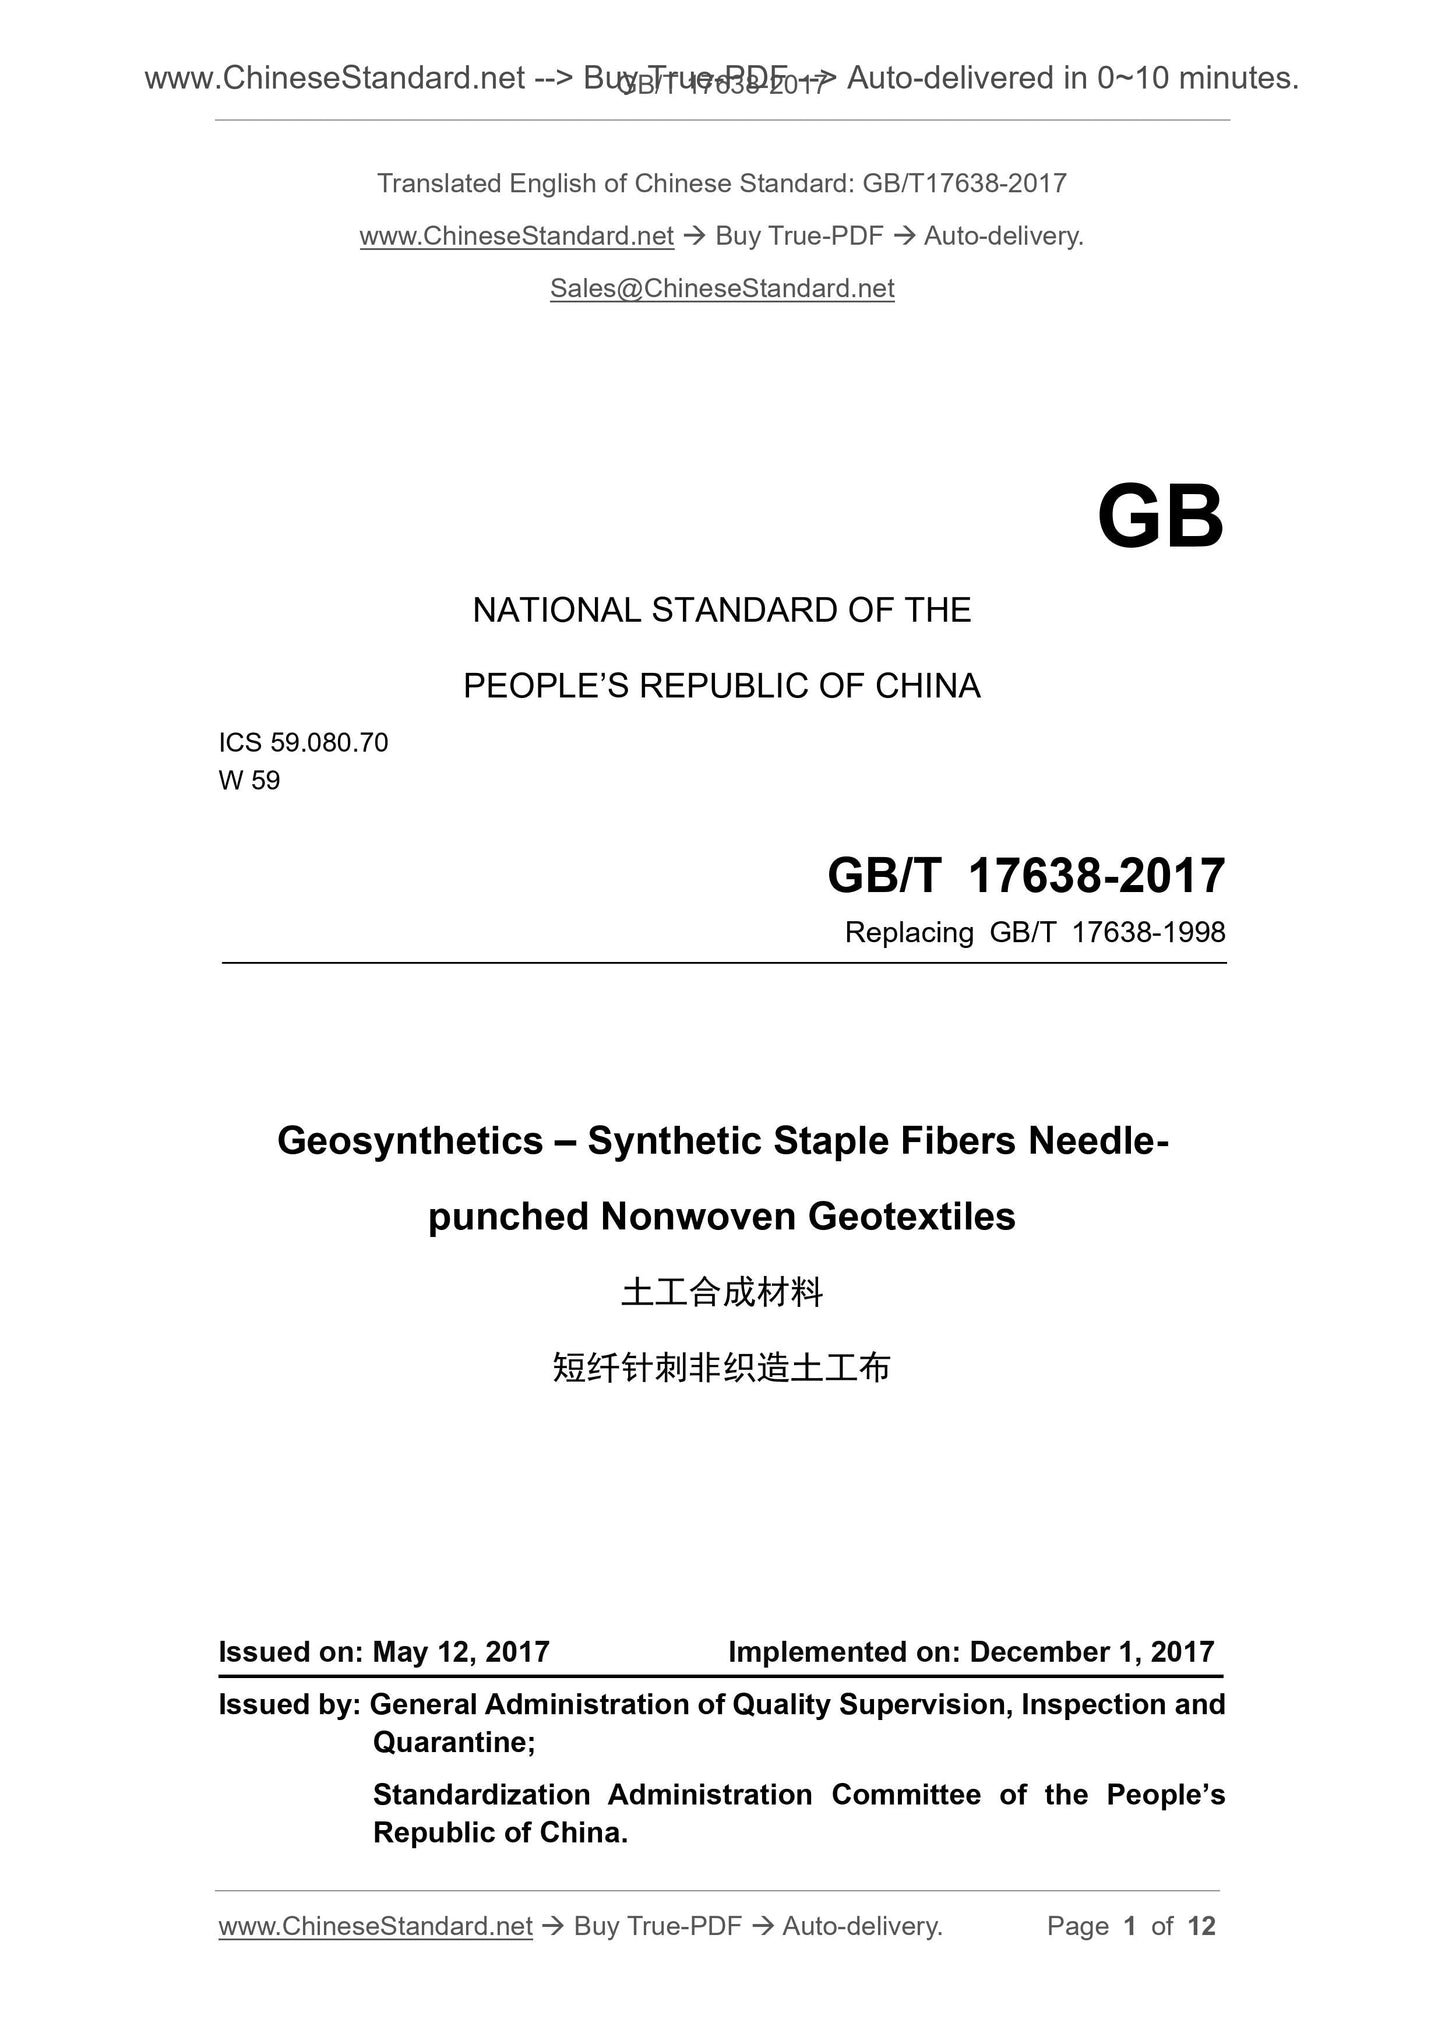 GB/T 17638-2017 Page 1